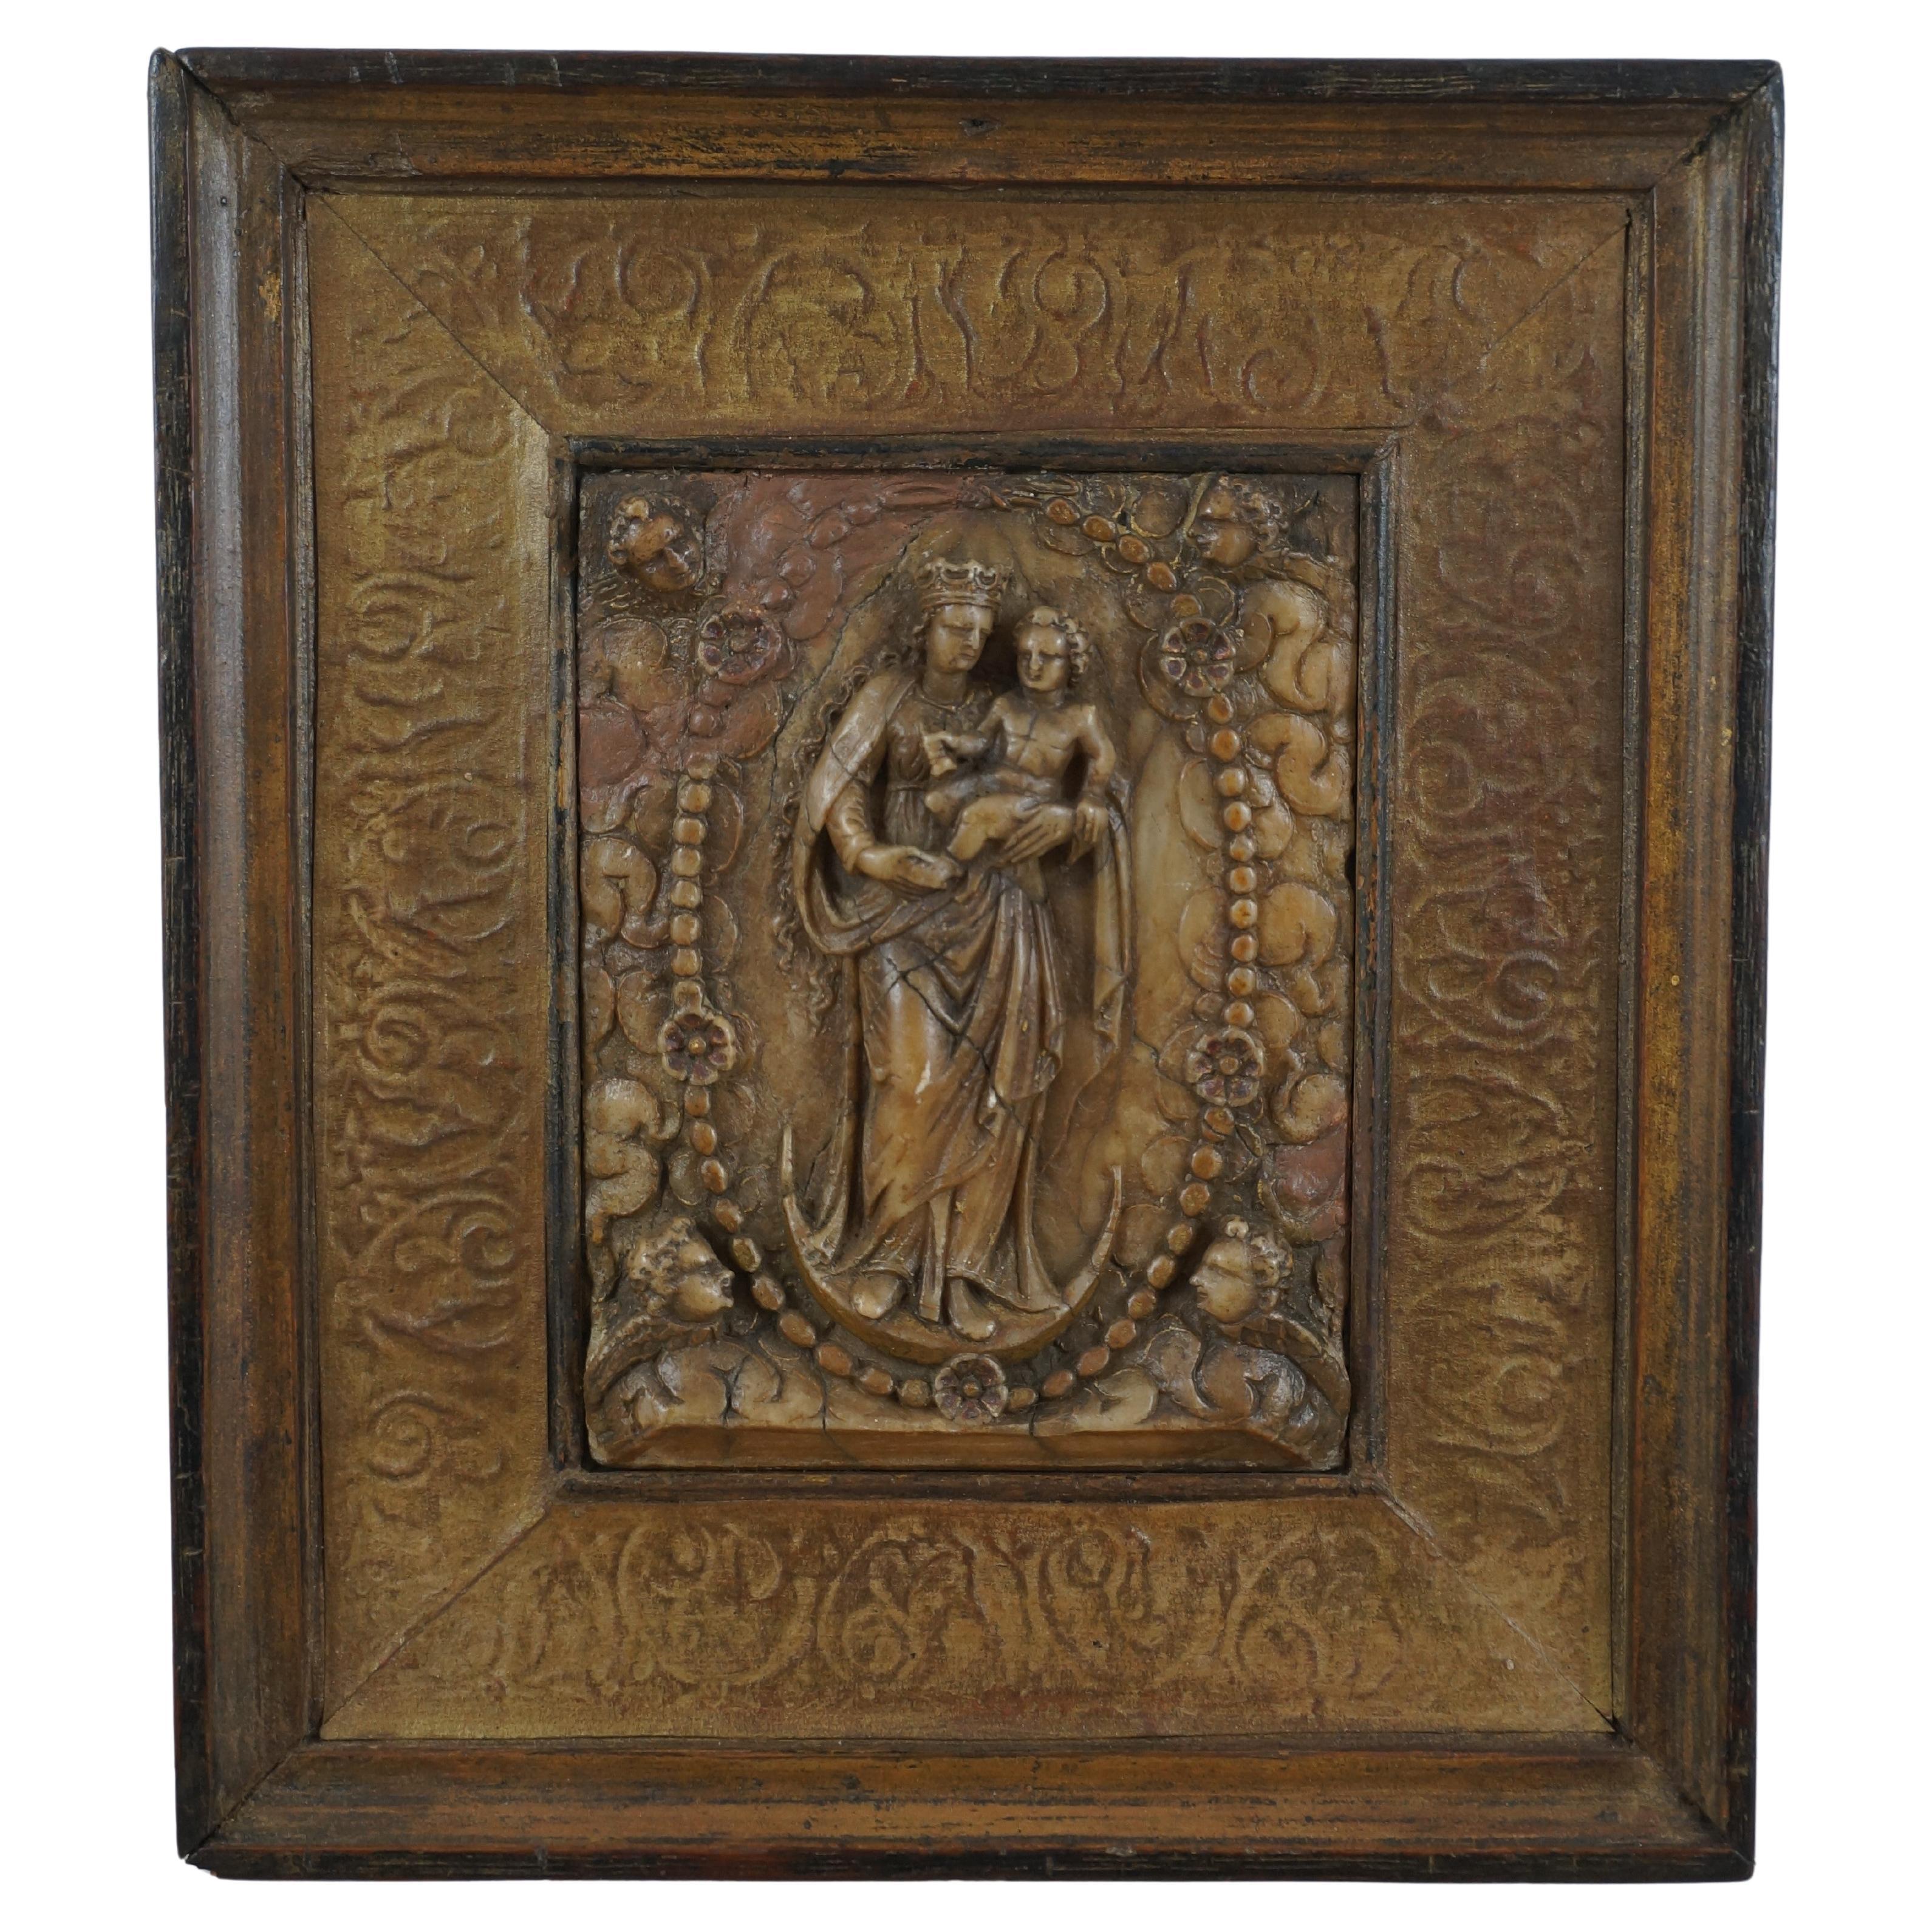  Antique alabaster relief, St. Mary of the Rosary, Belgium Malines, early 17th c